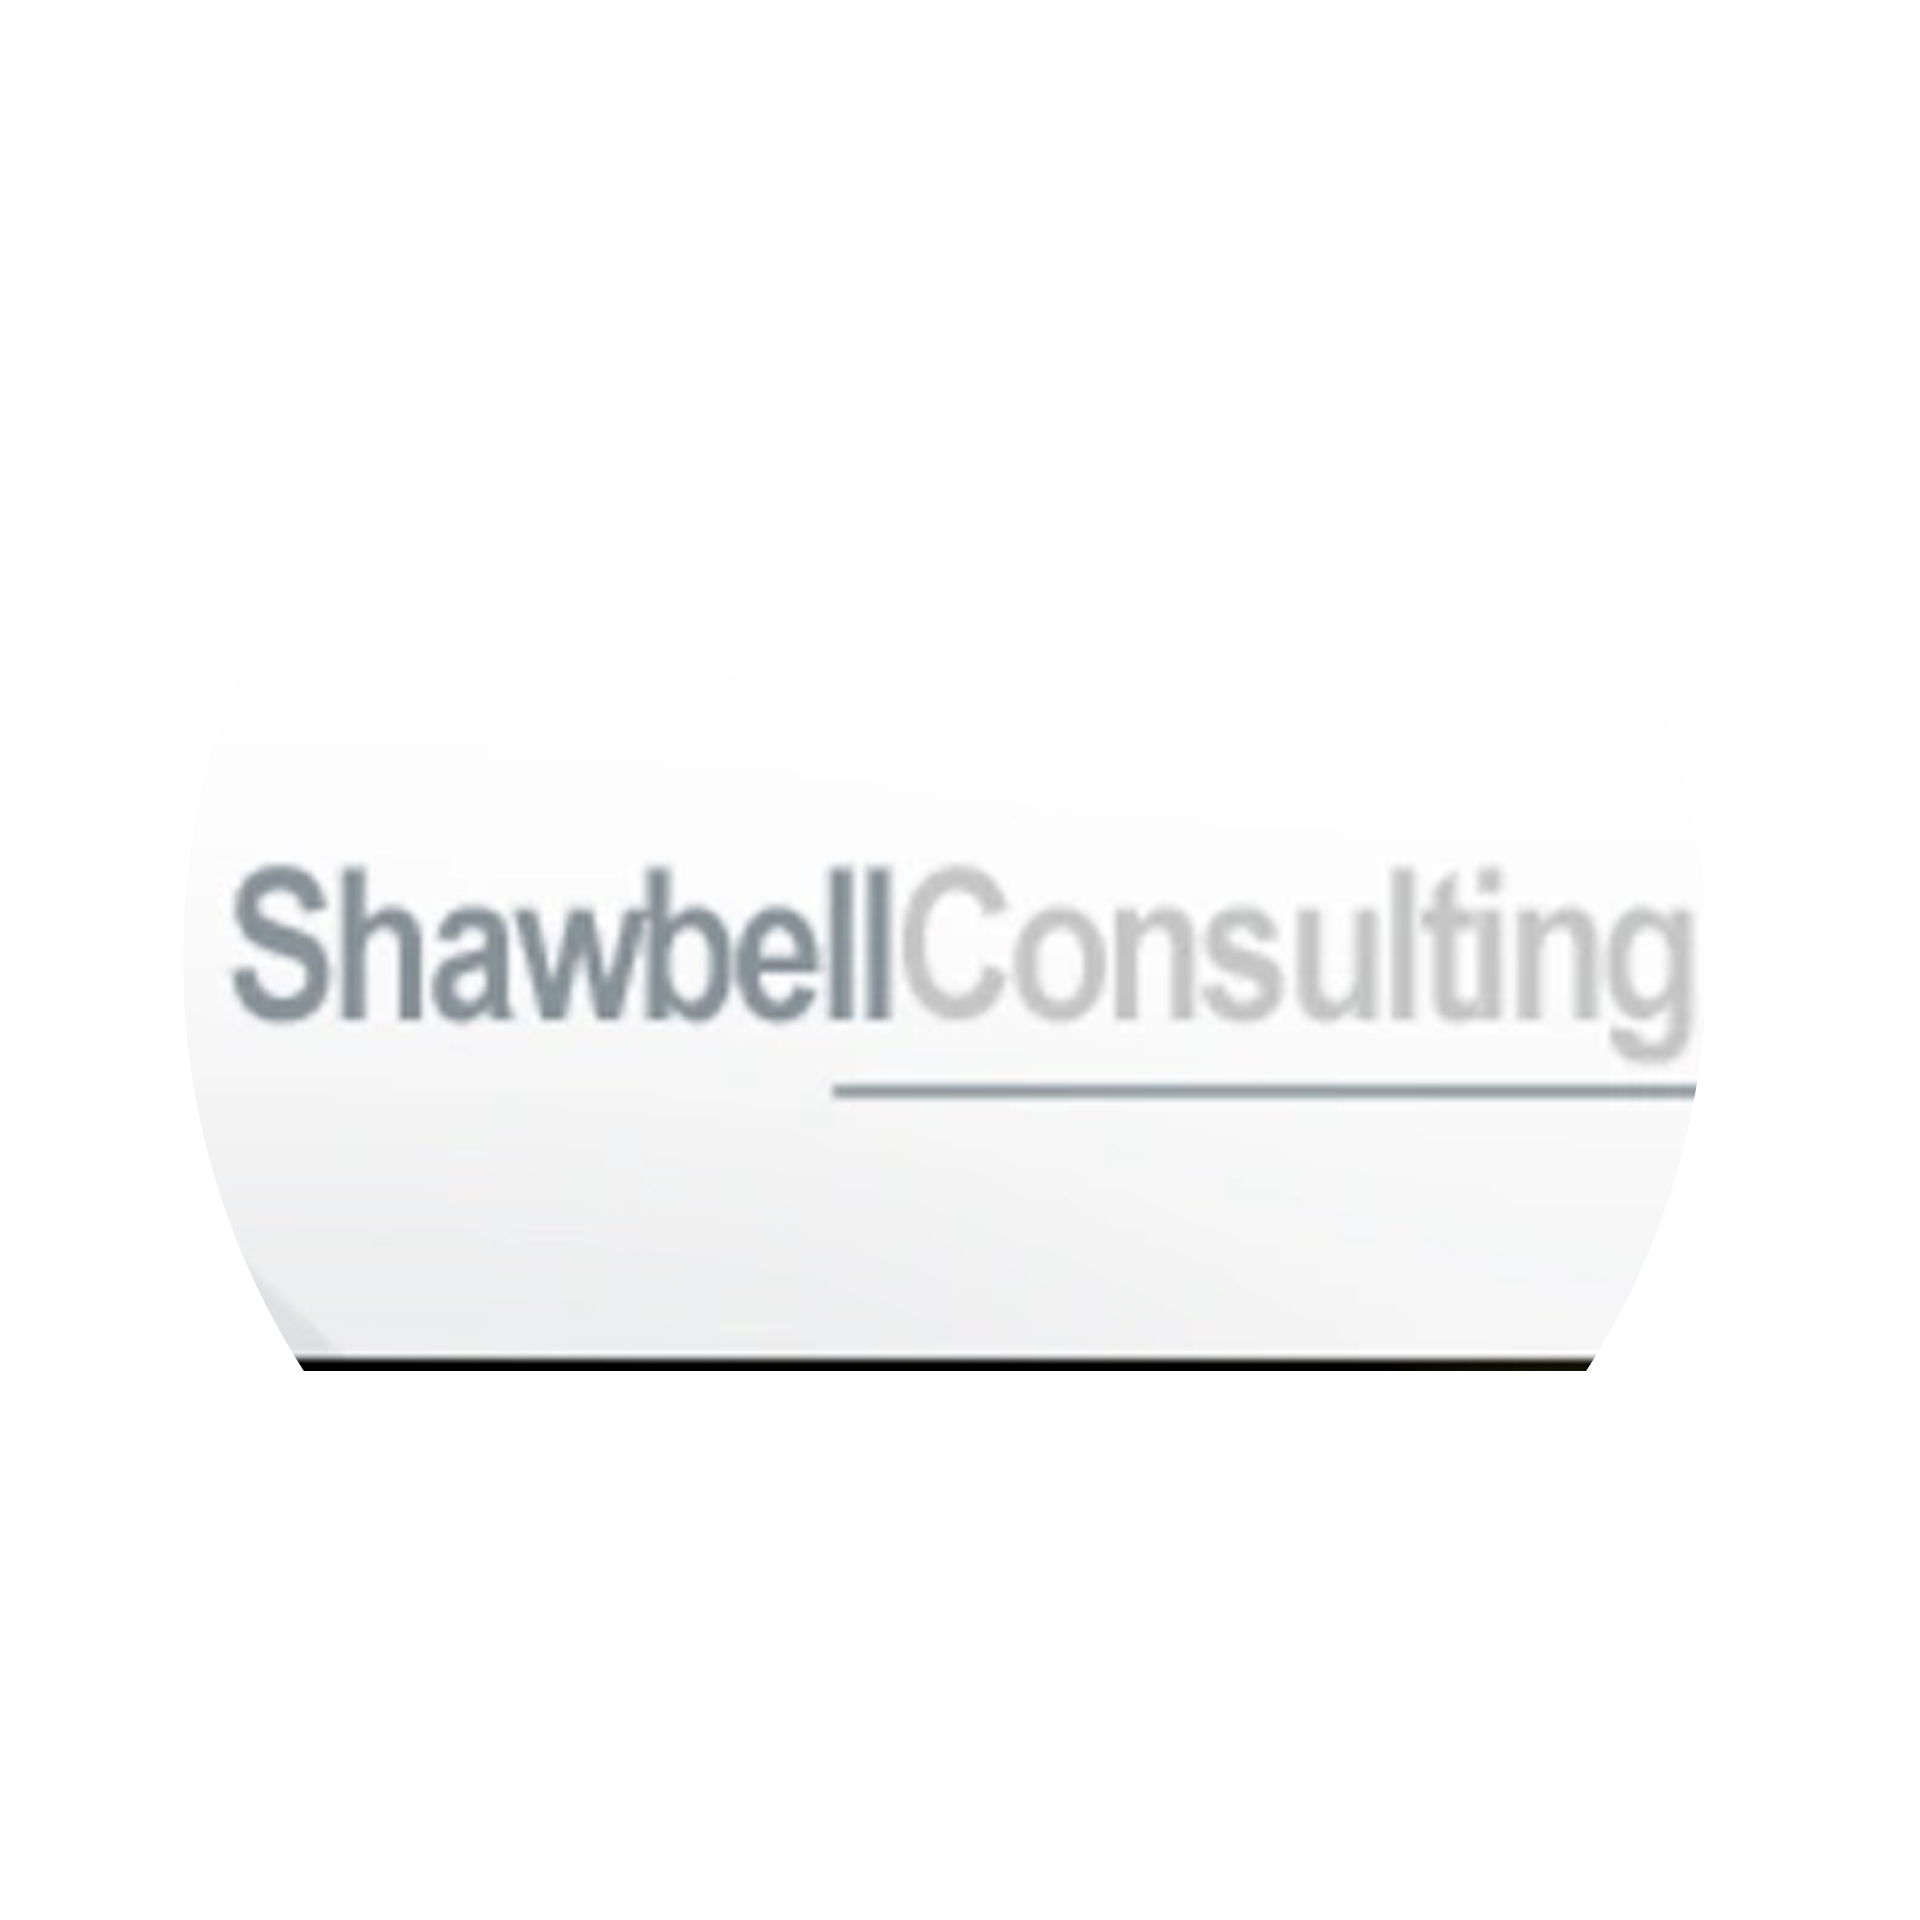 ShawbellConsulting is a unique, hybrid firm of Lawyers and Management Consultants, established in Ghana in 2002.